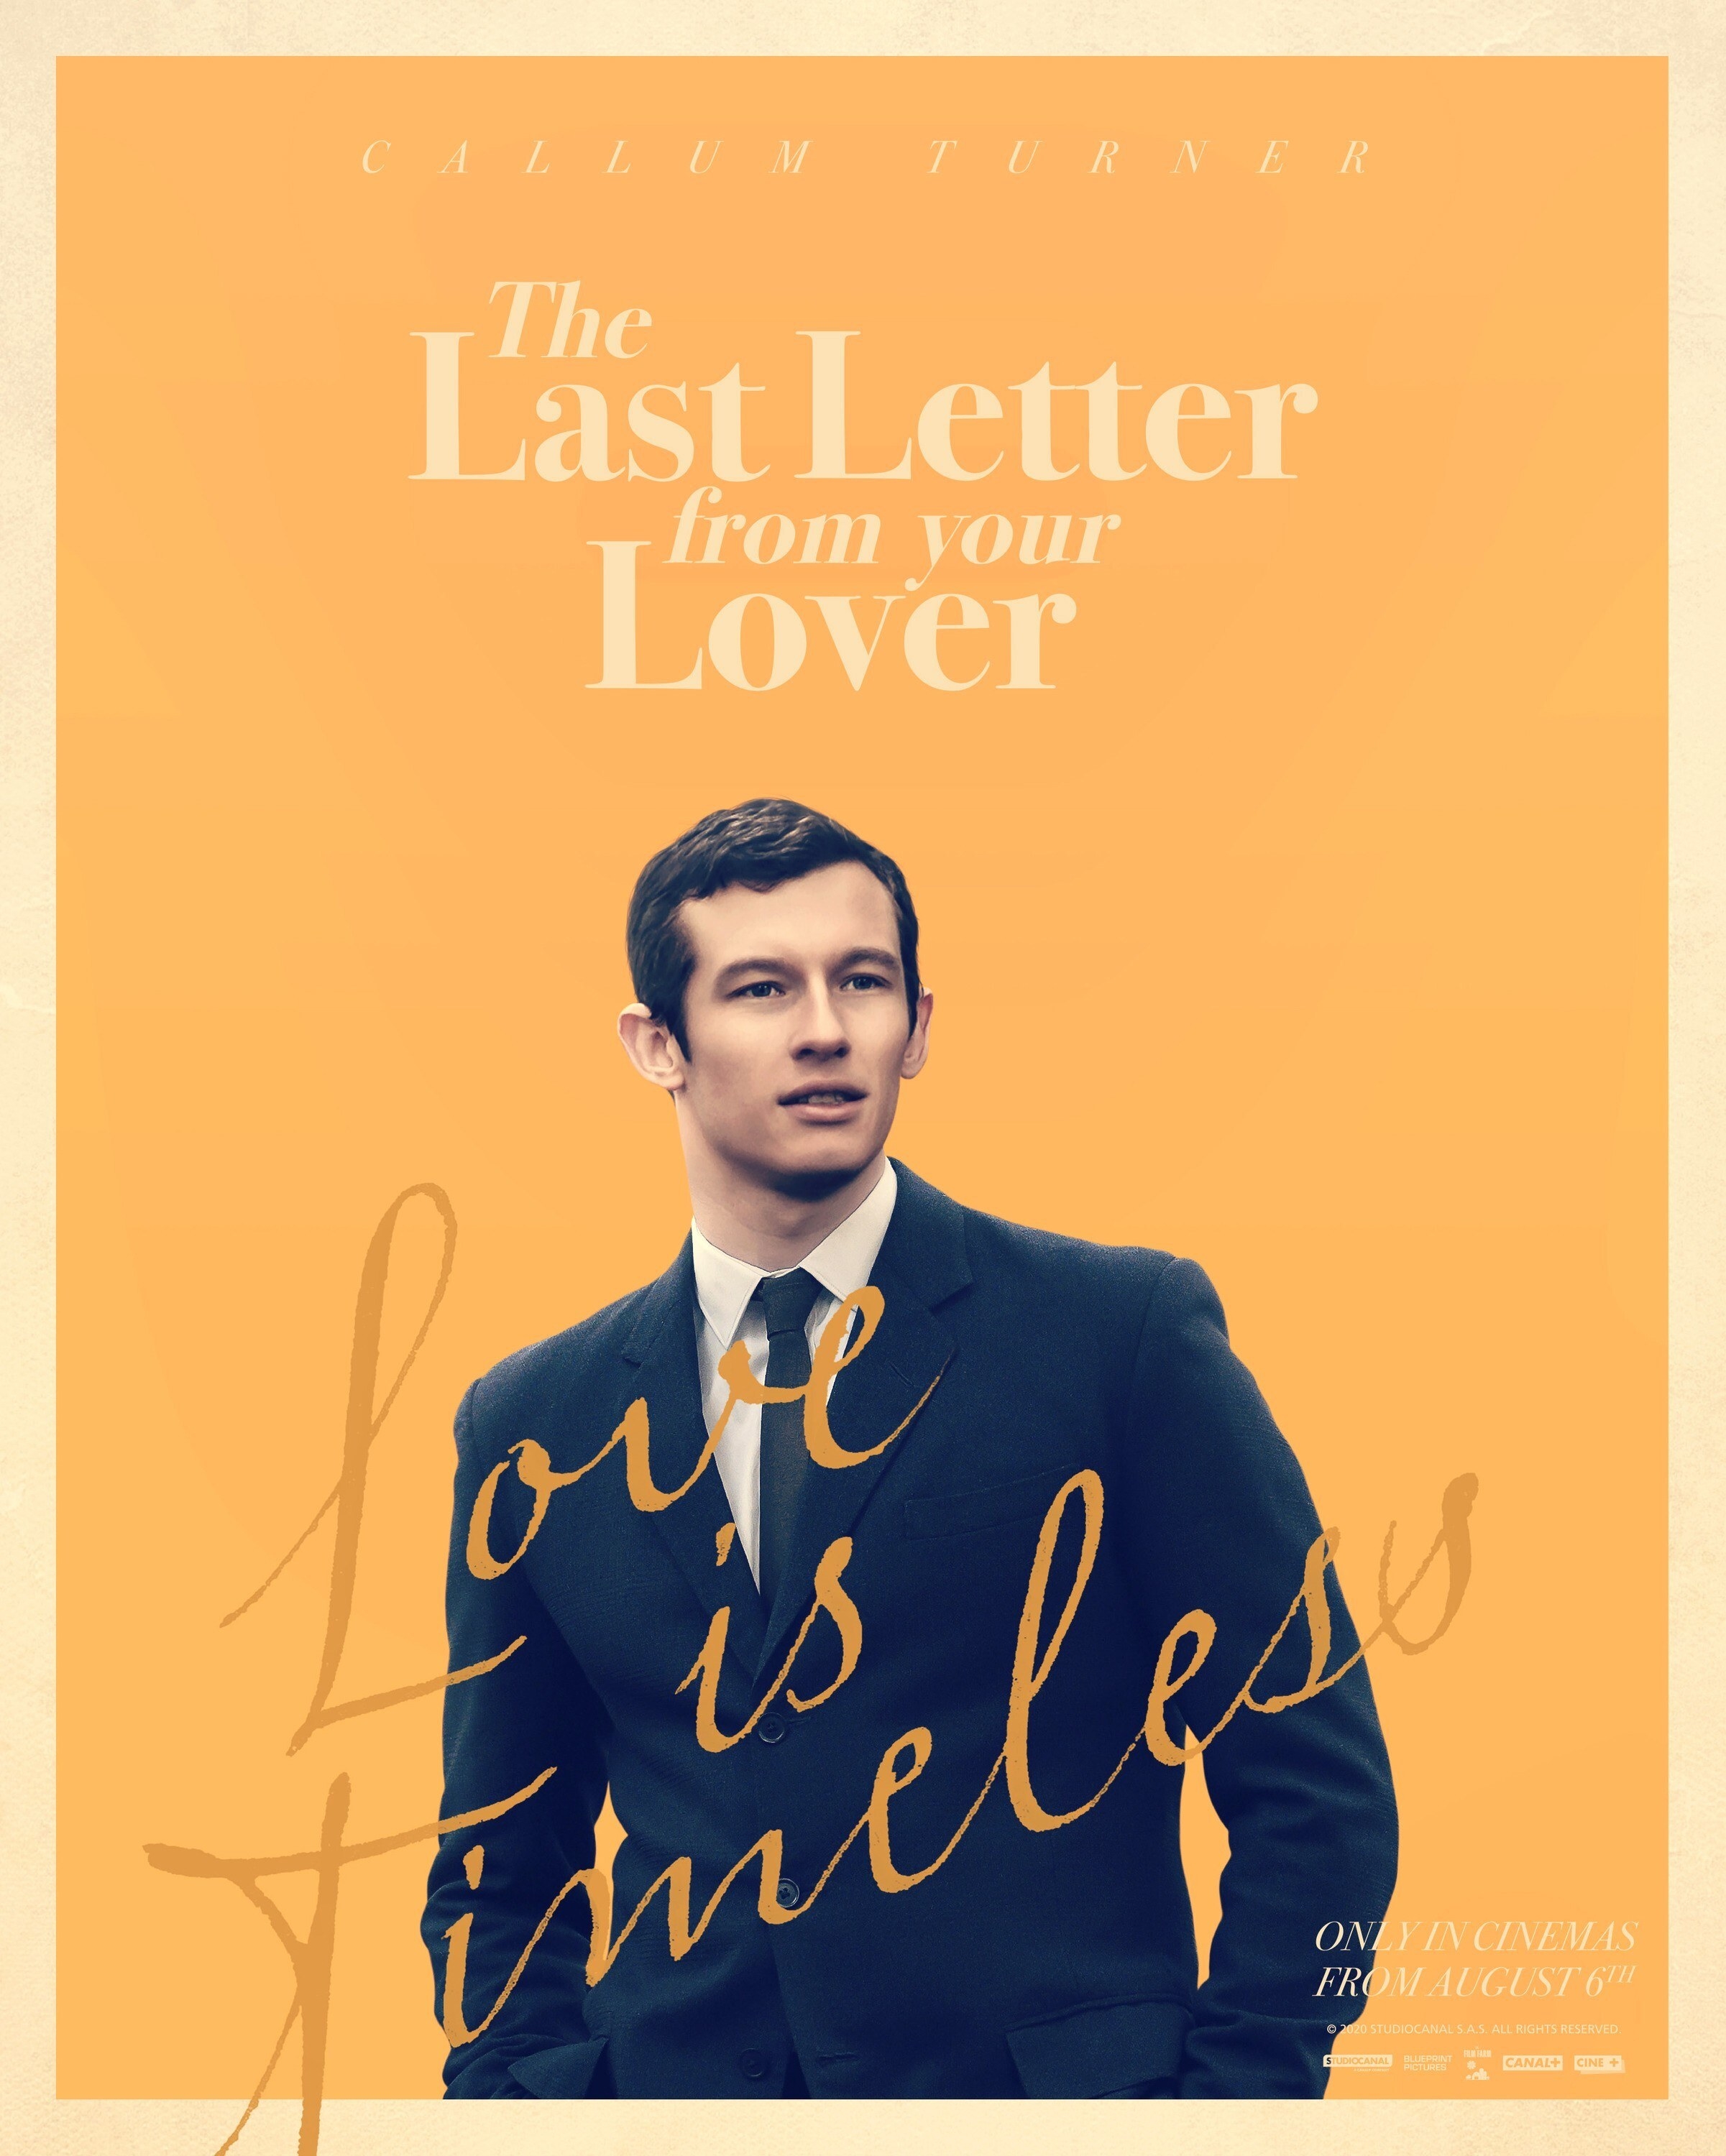 A movie poster featuring Callum Turner, his name at the top, text &quot;The Last Letter from your Lover&quot; under, with a portrait of him in suit and tie seriously observing something, handwriting-style script saying Love is Timeless over it